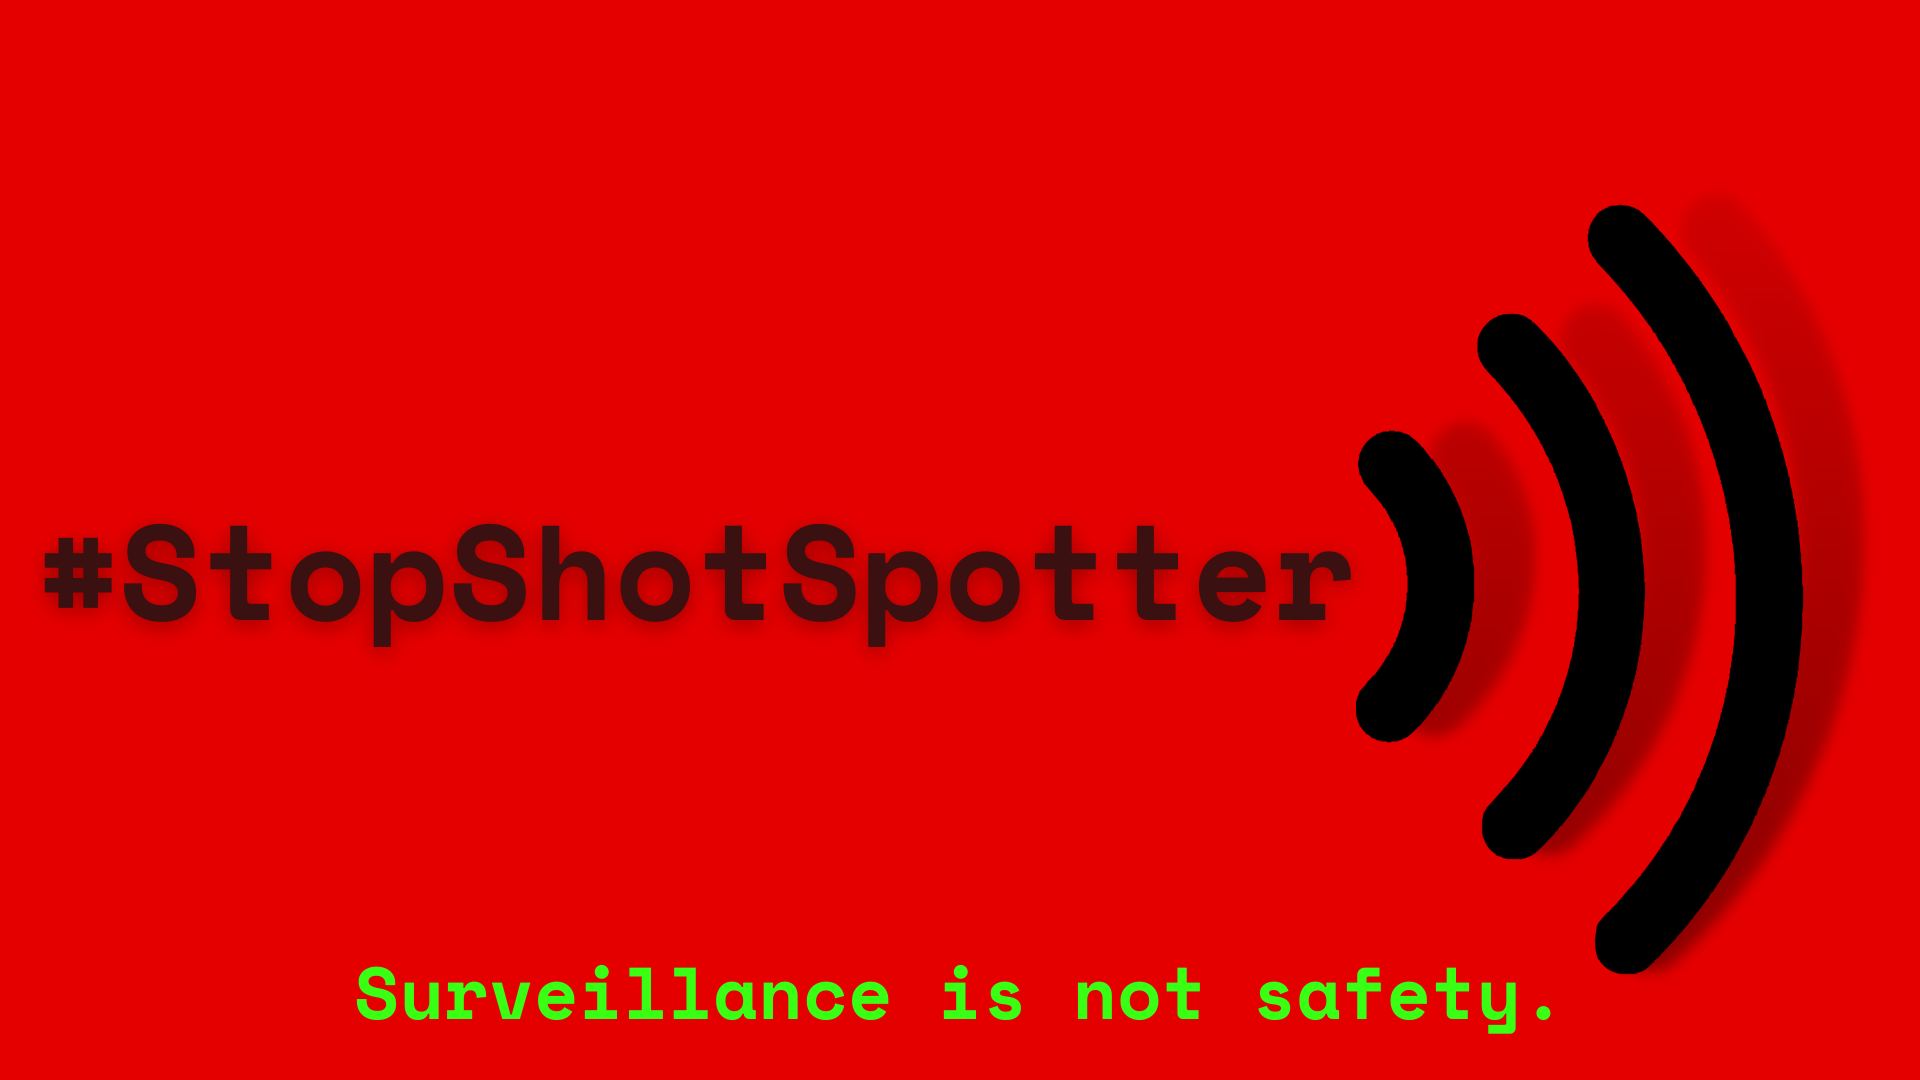 StopShotSpotter.  Surveillance is not safety.  The background is bright red.